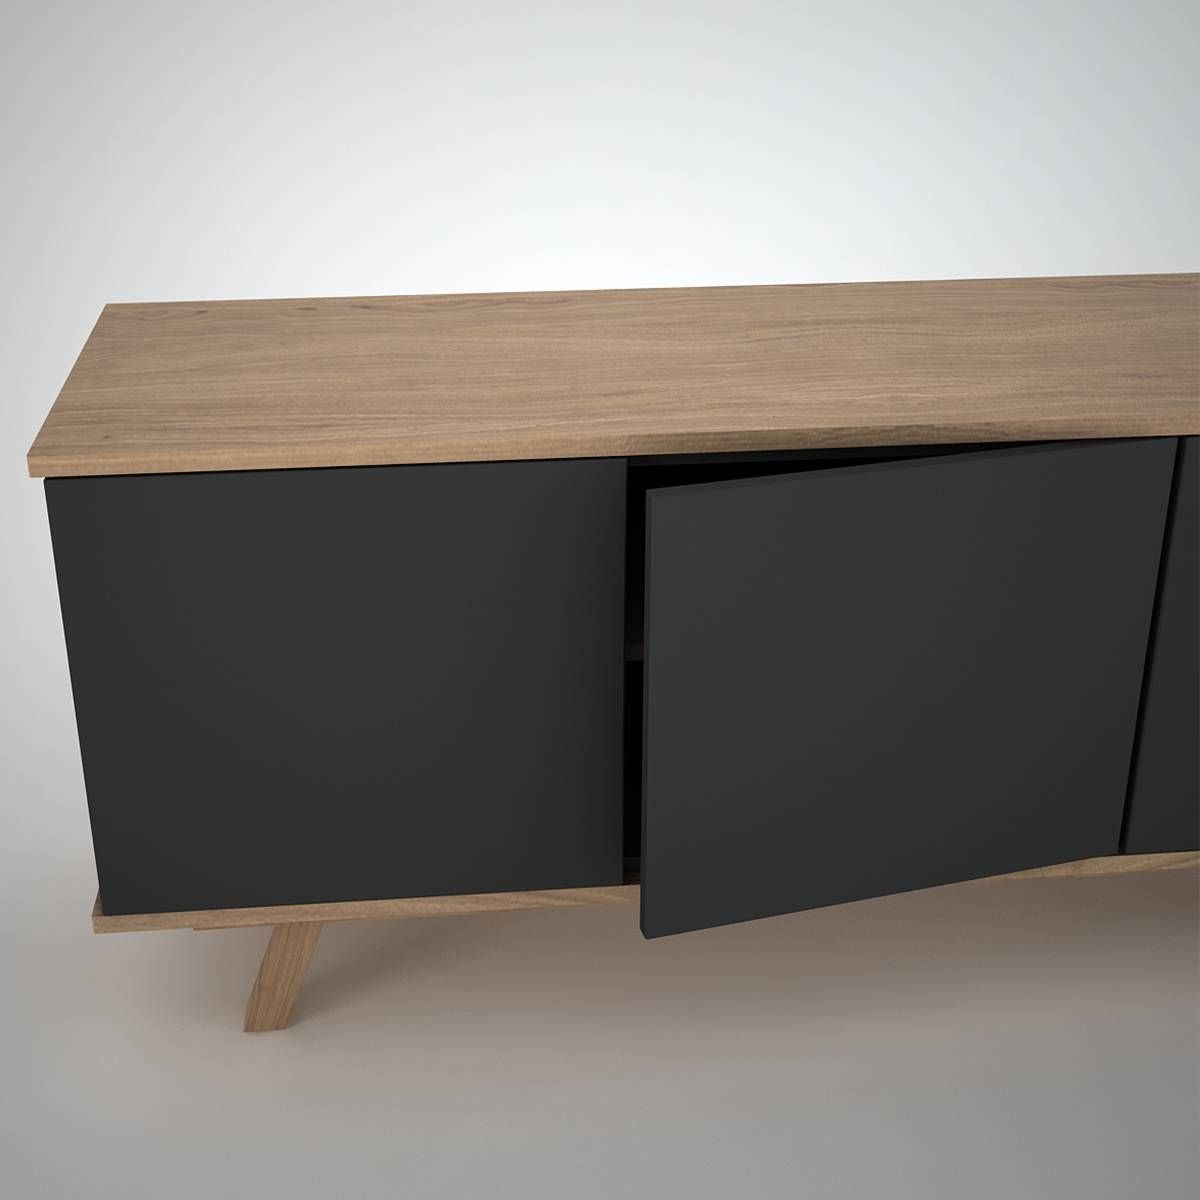 Furniture: Mid Century Modern Sideboard For Inspiring Interior Pertaining To Modern Sideboards (View 7 of 20)